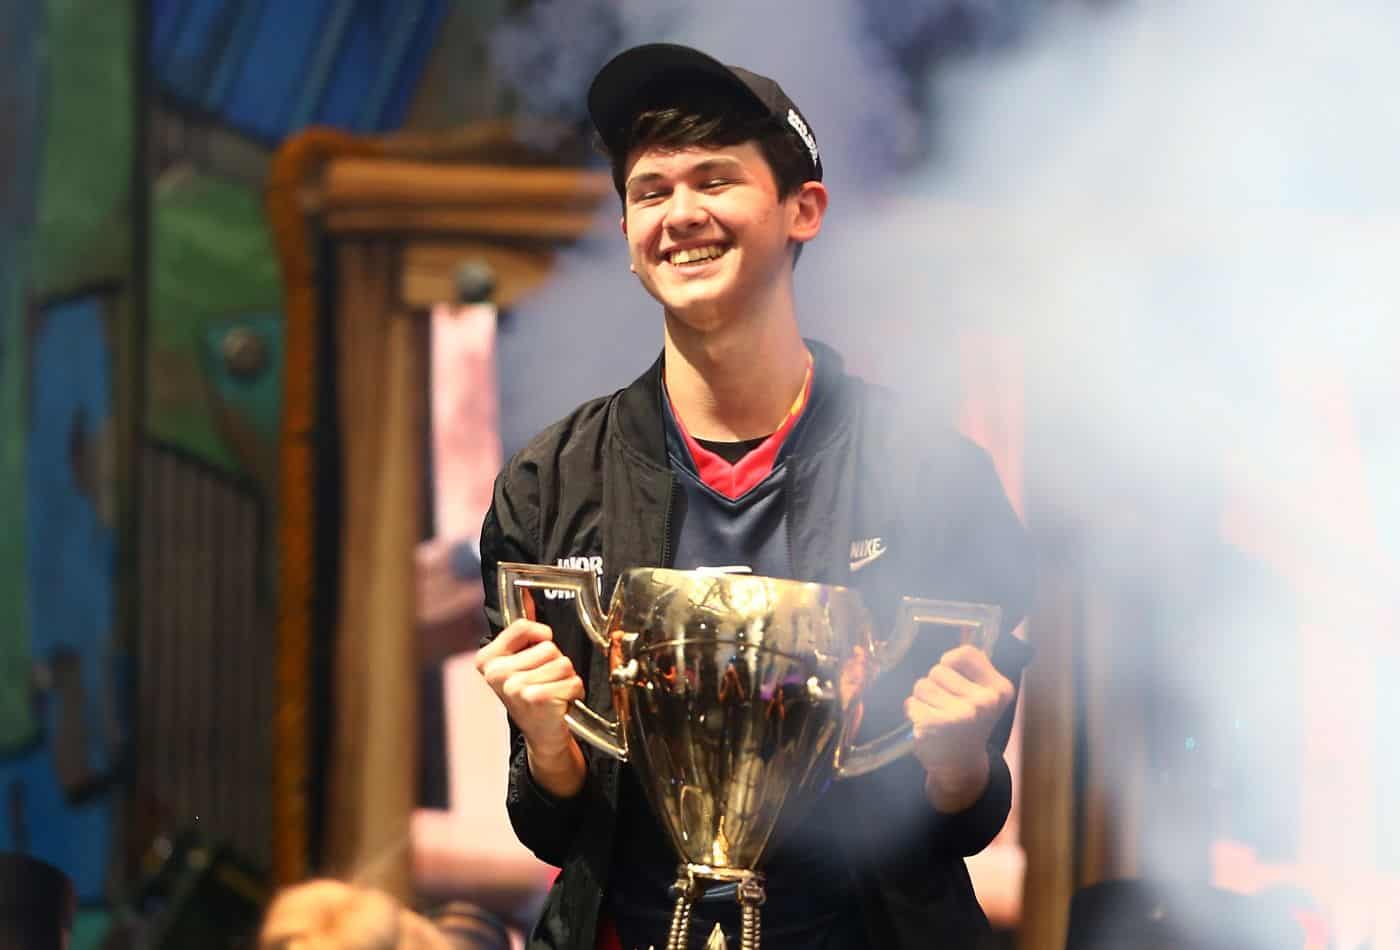 Teen Just Made $3 Million Playing Fortnite